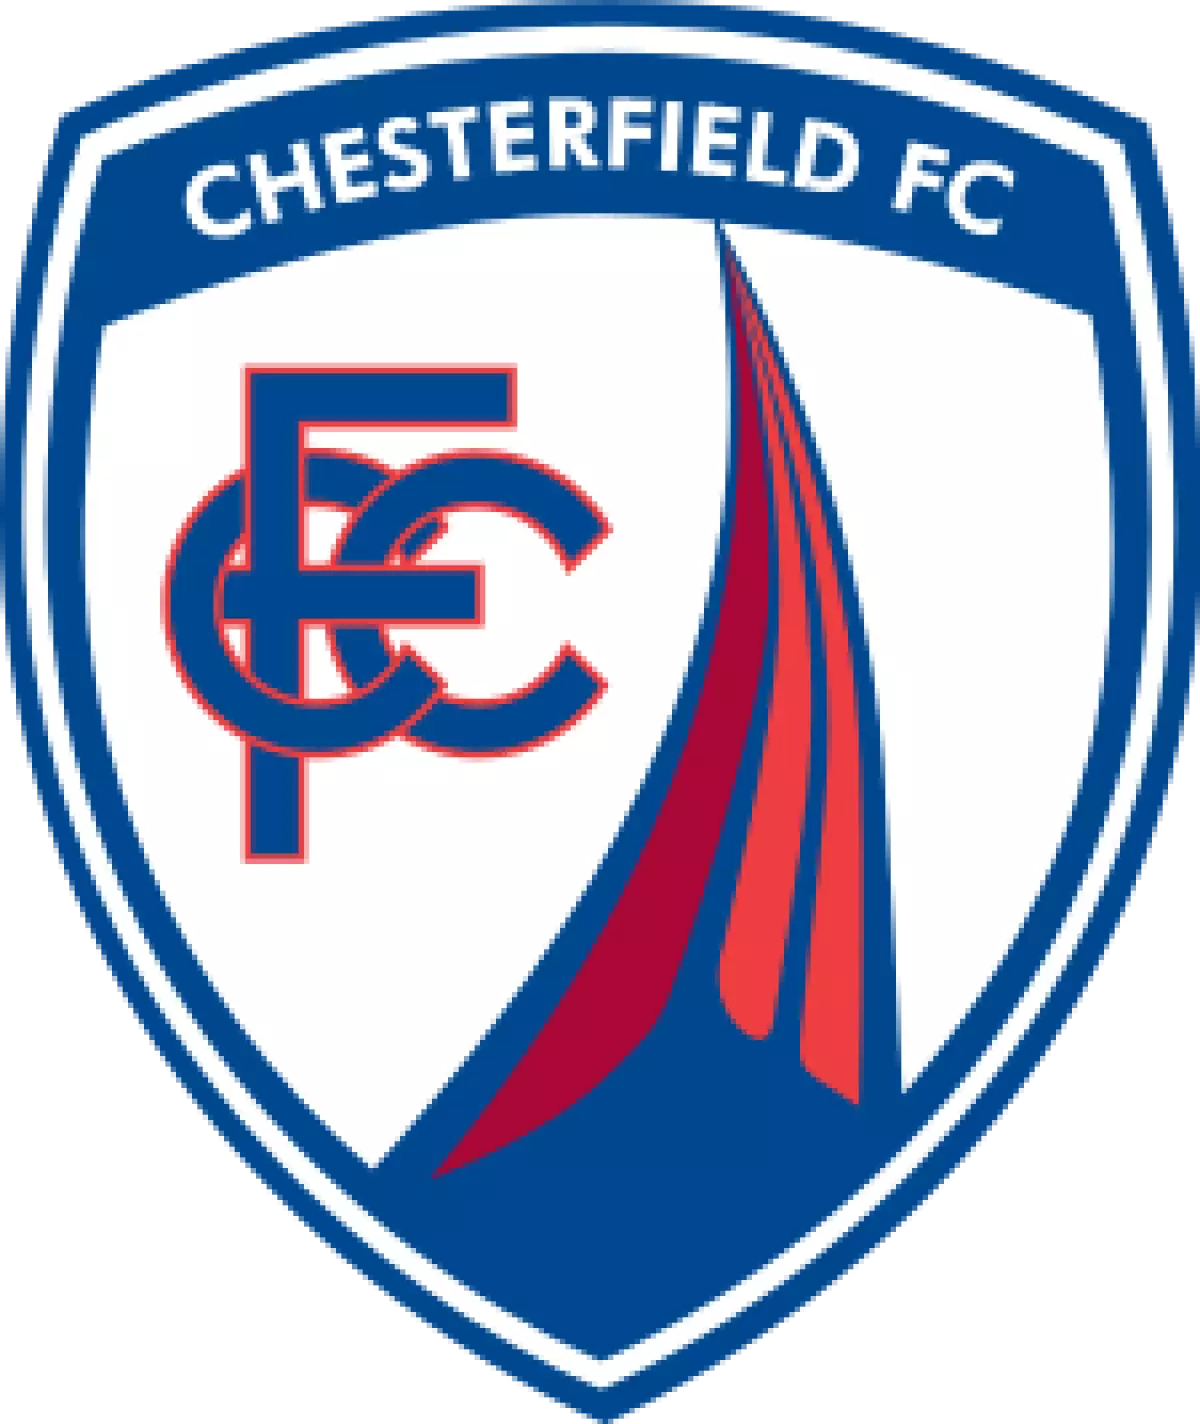 Chesterfield FC crest